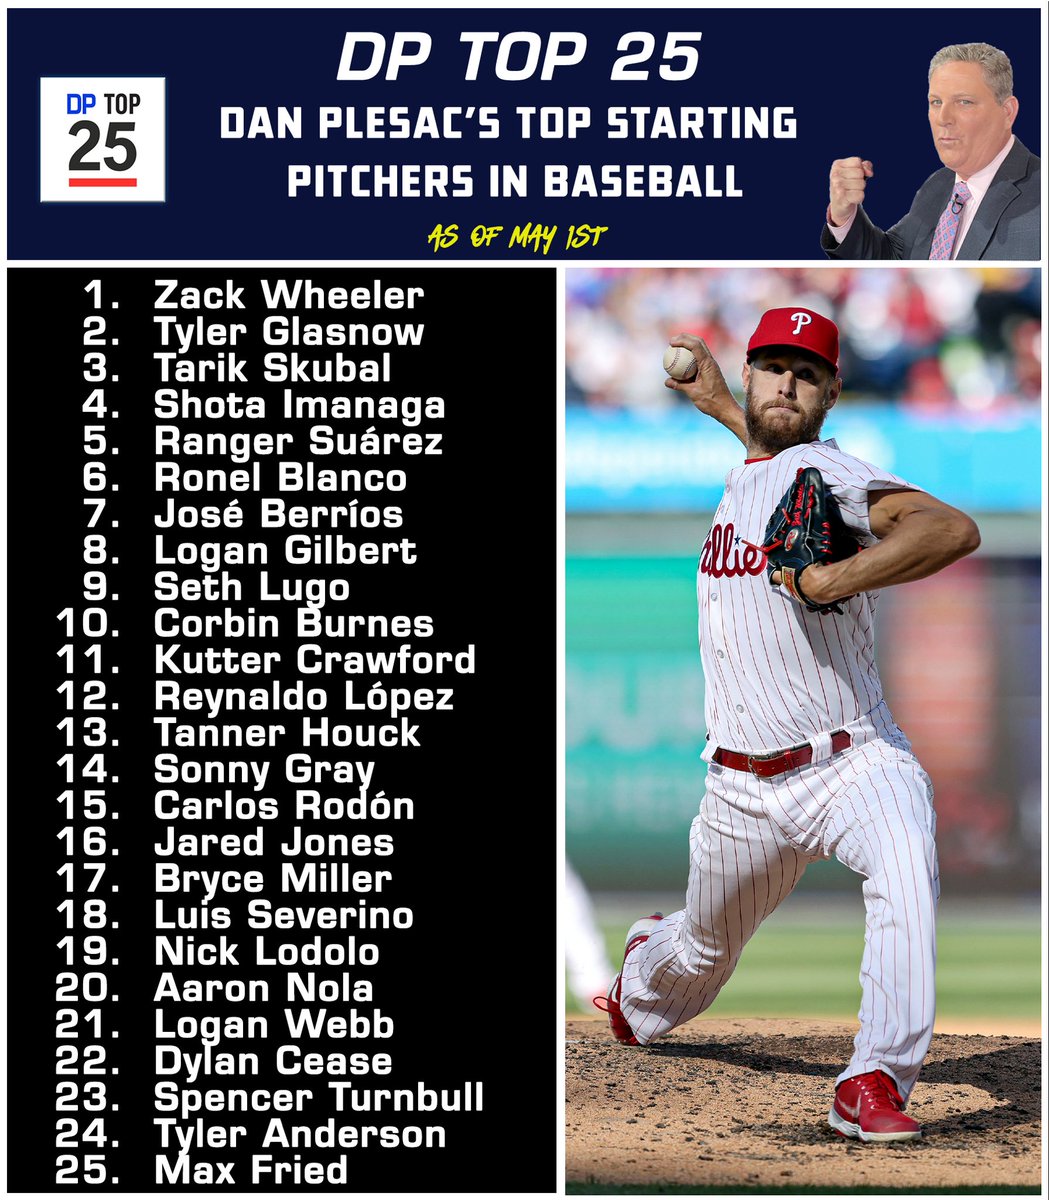 Here it is … the NEW  “DP - TOP 25” …. The top 25 starting pitchers in baseball right now ! YEP that South Philly guy still numero uno !